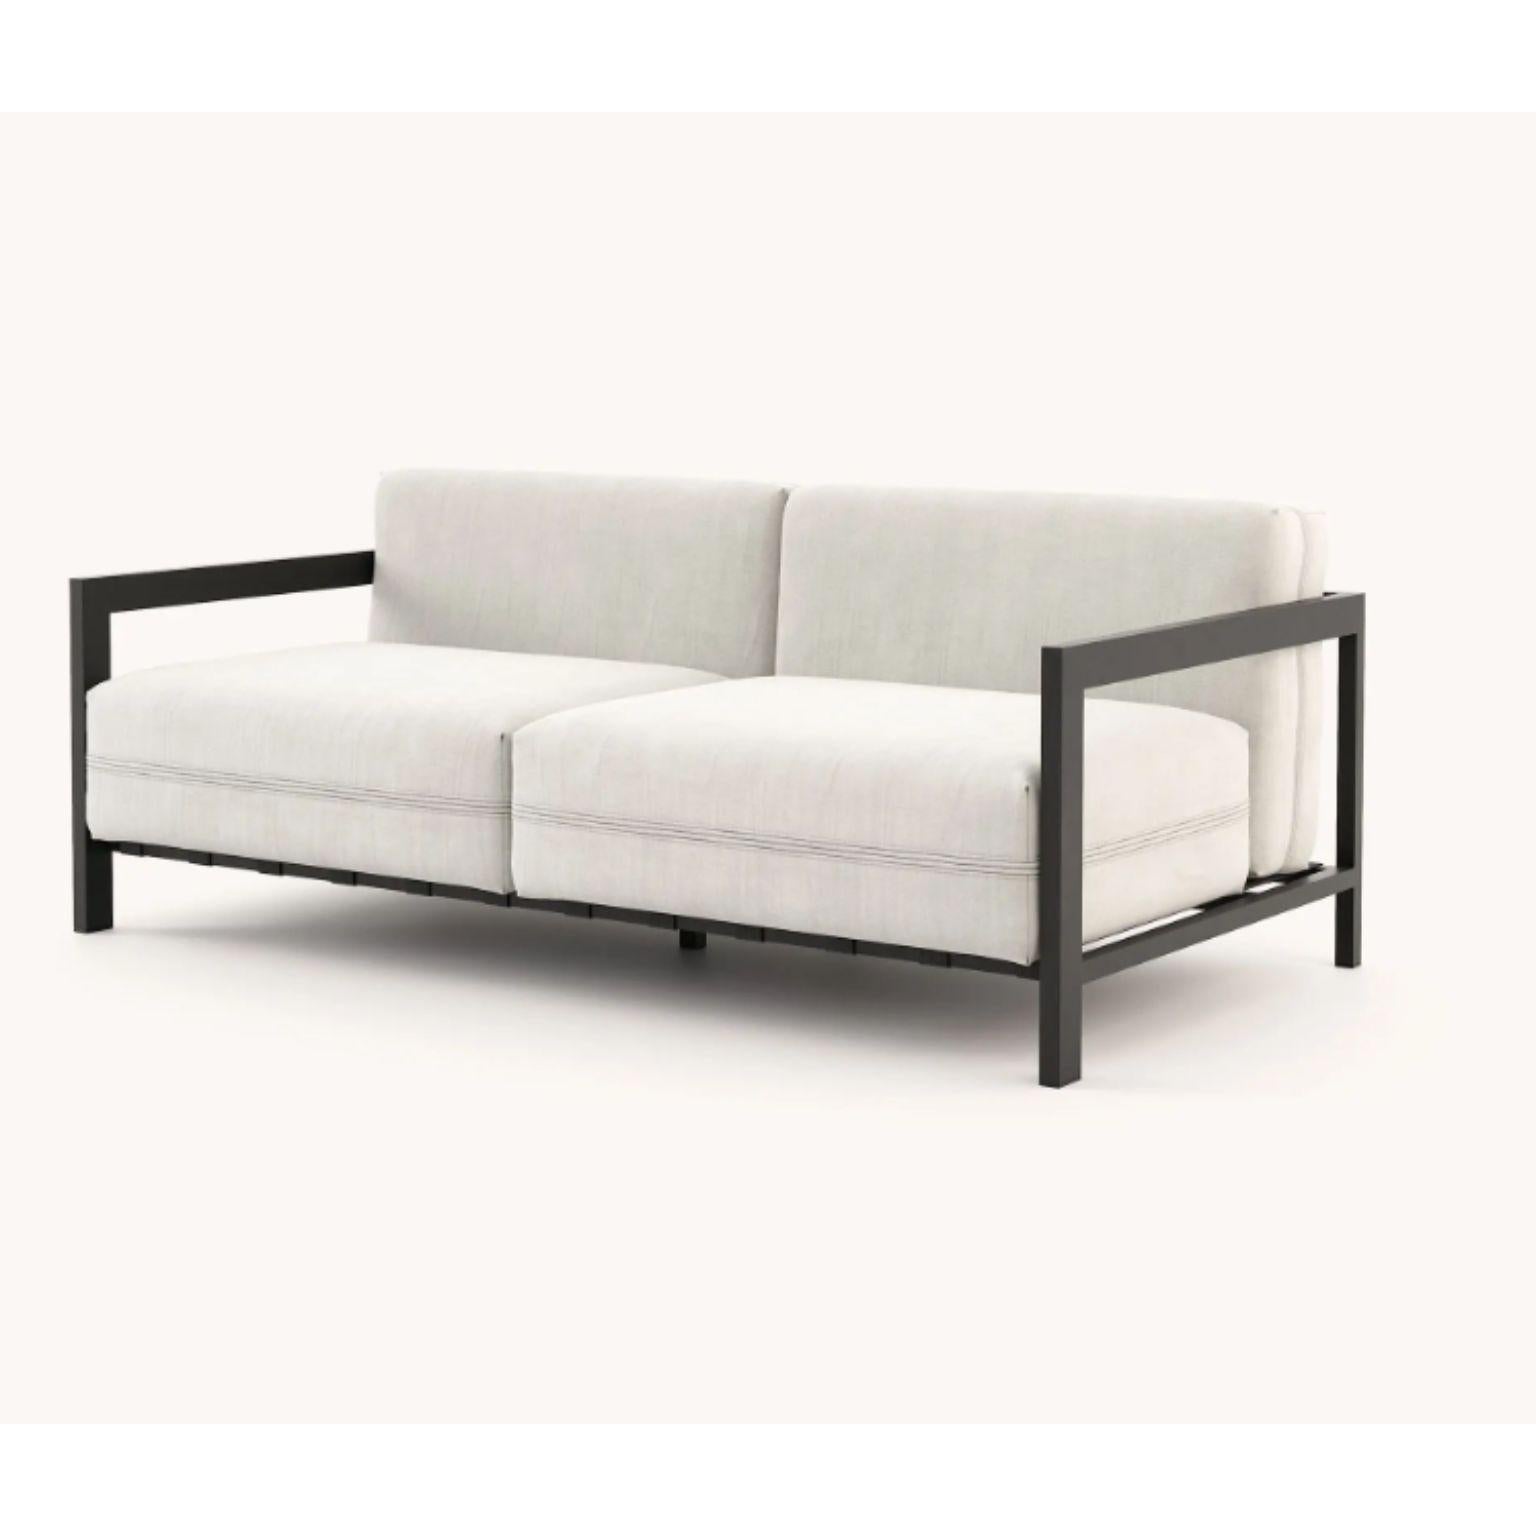 Bondi 2 seats sofa by Domkapa.
Materials: black texturized stainless steel, fiber (Drava Nata).
Dimensions: W 182 x D 95 x H 72 cm.
Also available in different materials. 

The clean aesthetic gives an organic shape and a pleasing design to the